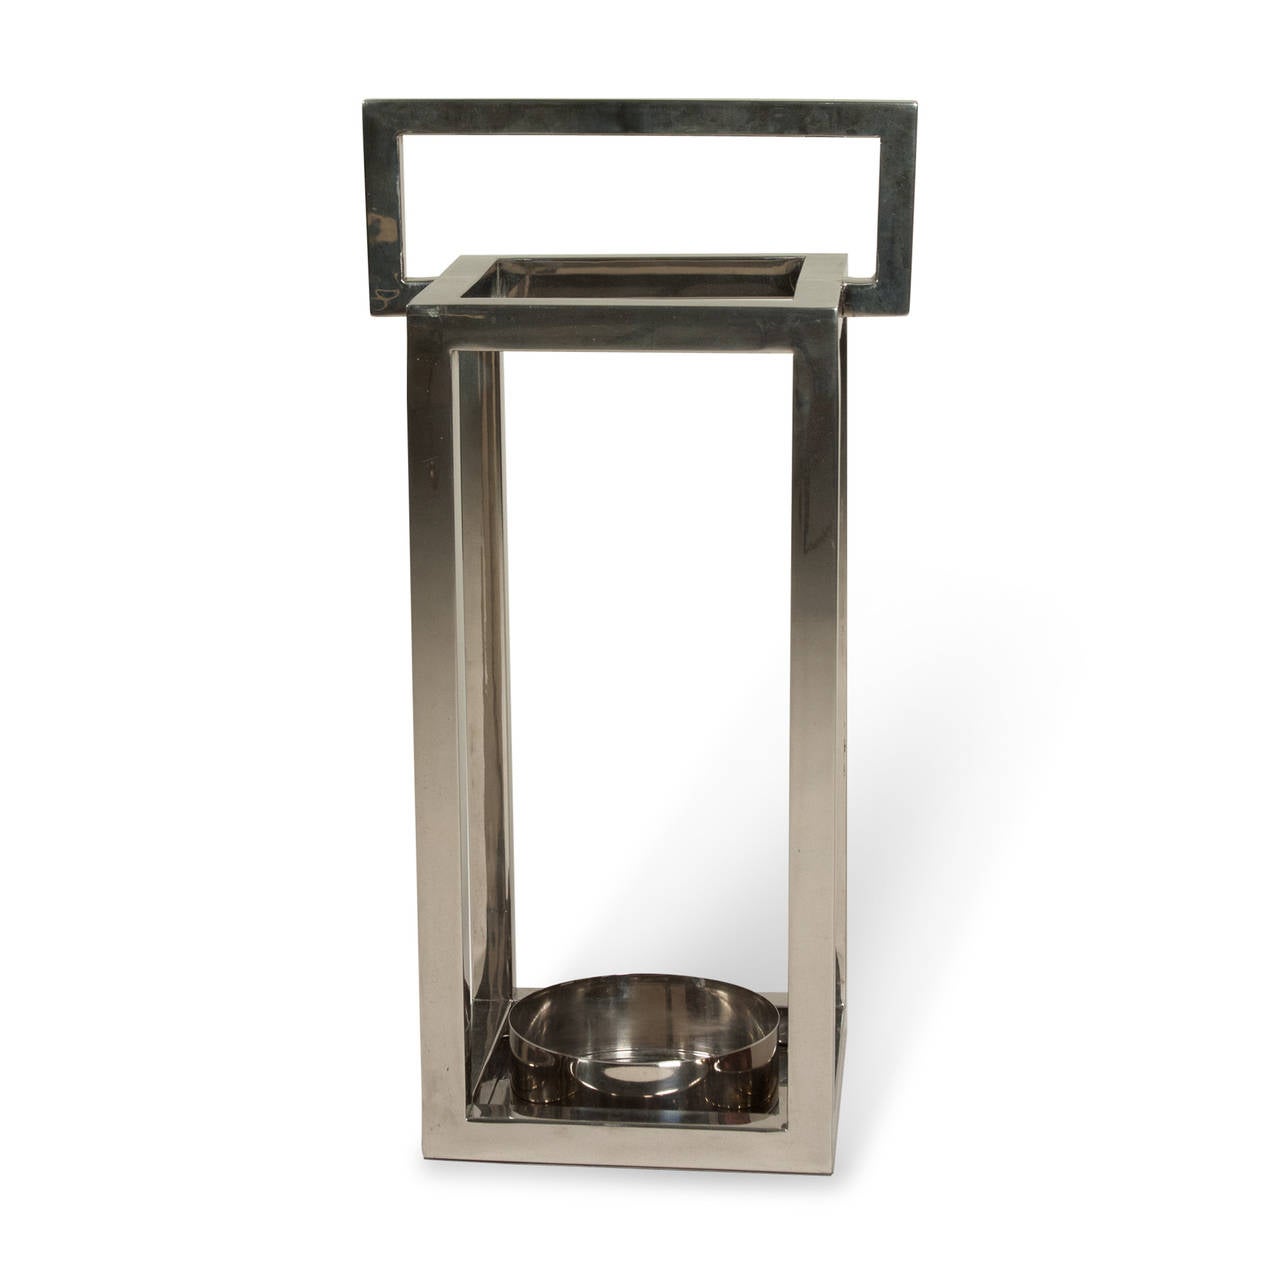 Square polished stainless steel frame umbrella stand, handle top and bottom dish, American 1970s. 9 in square, height 23 in. (Item #2275)